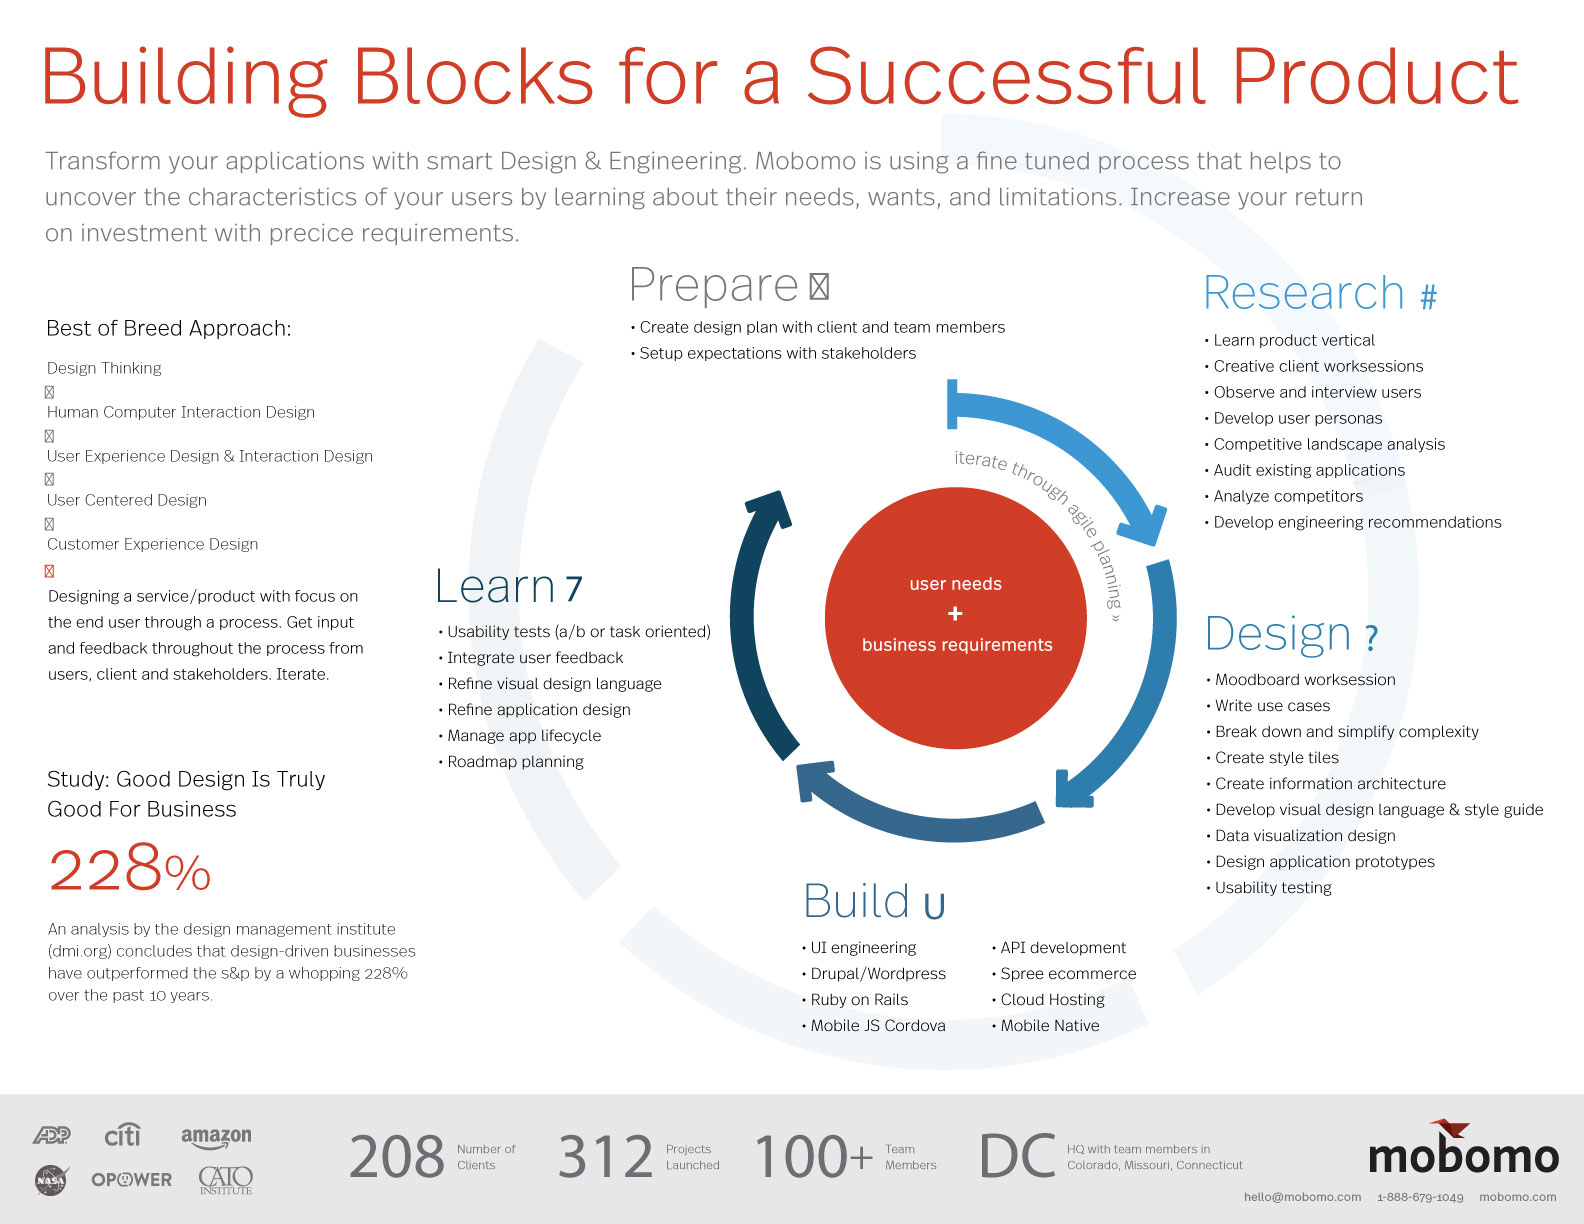 Building blocks for a successful product